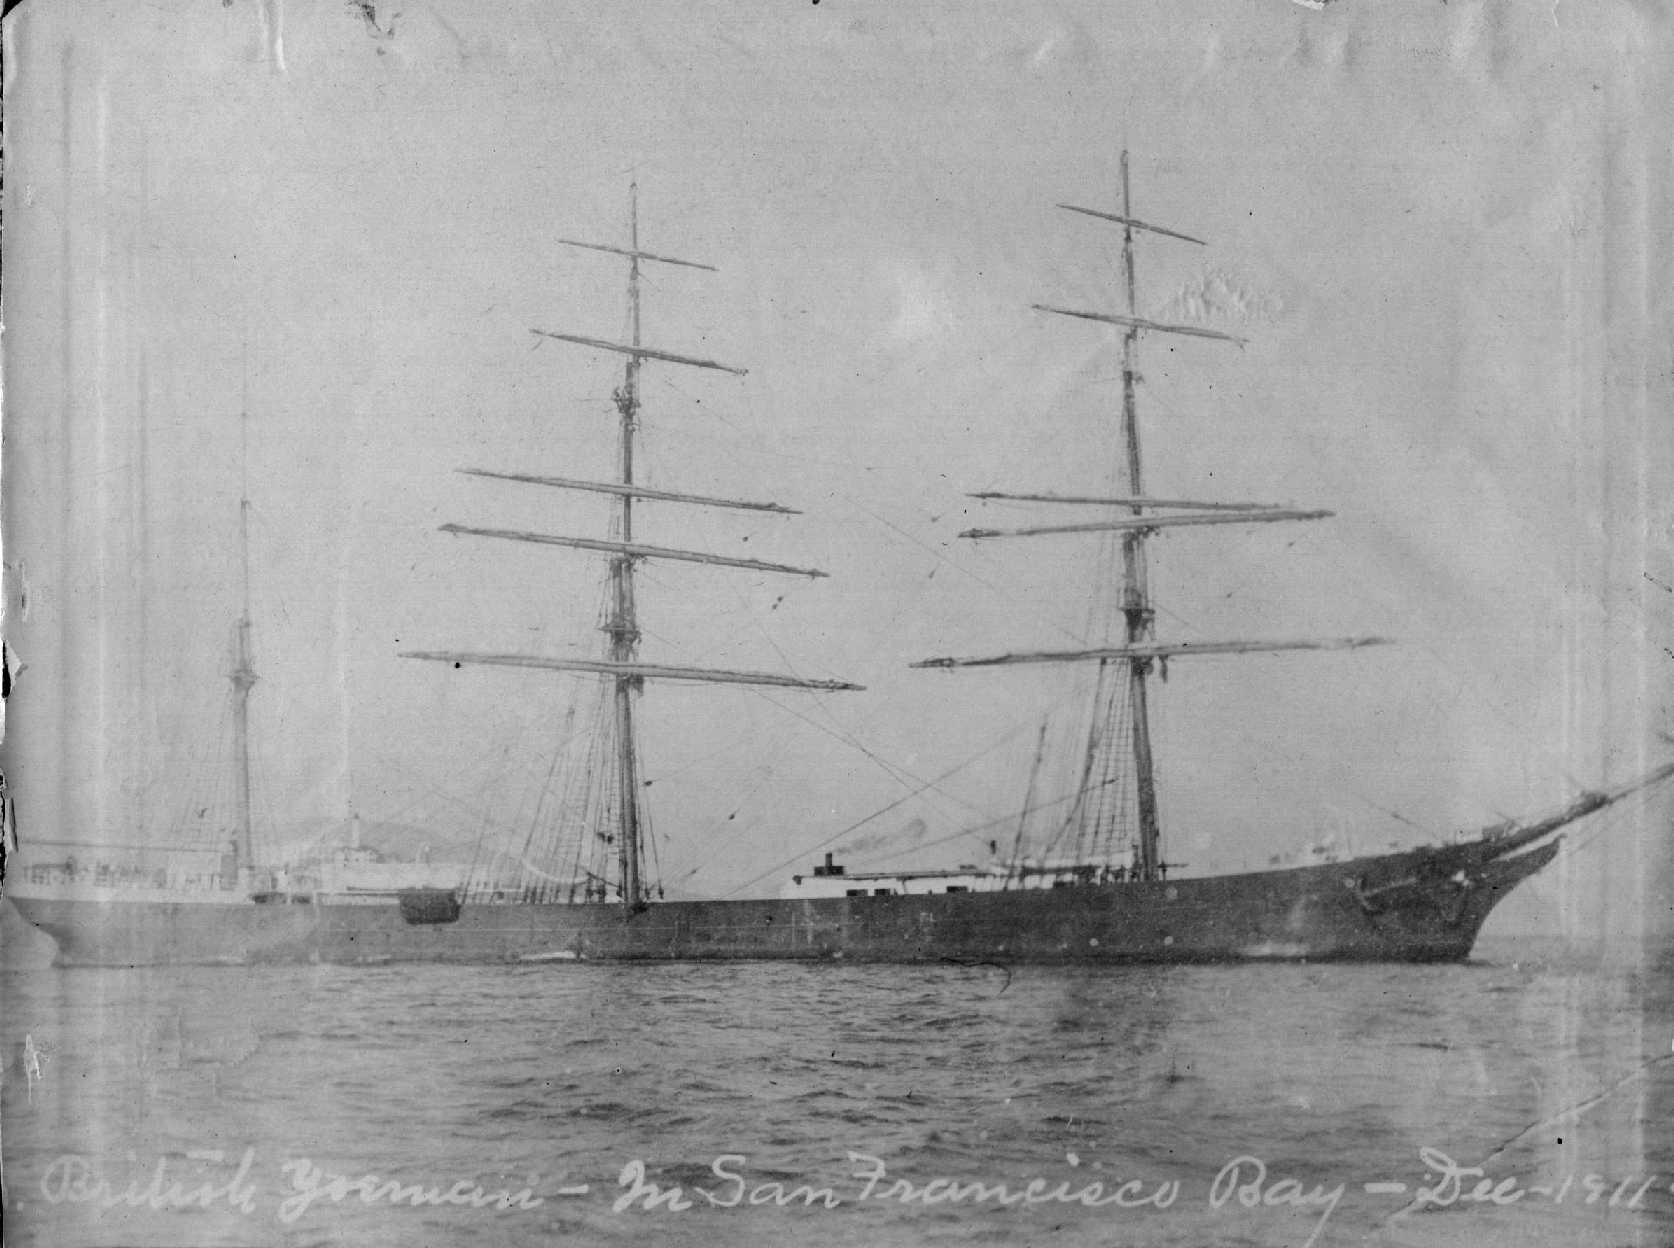 Iron Barque, "British Yeoman", ex "Stefano Razeto', built in 1880 by Oswald, Mordaunt & Co - Southampton.  Owned by Eschen & Minor.
Tonnage:  1953 gross, 1862 net
Dimensions:  length 269'2", breadth 39'8", draught 24'2"
Port Of Registry:  San Fransisco